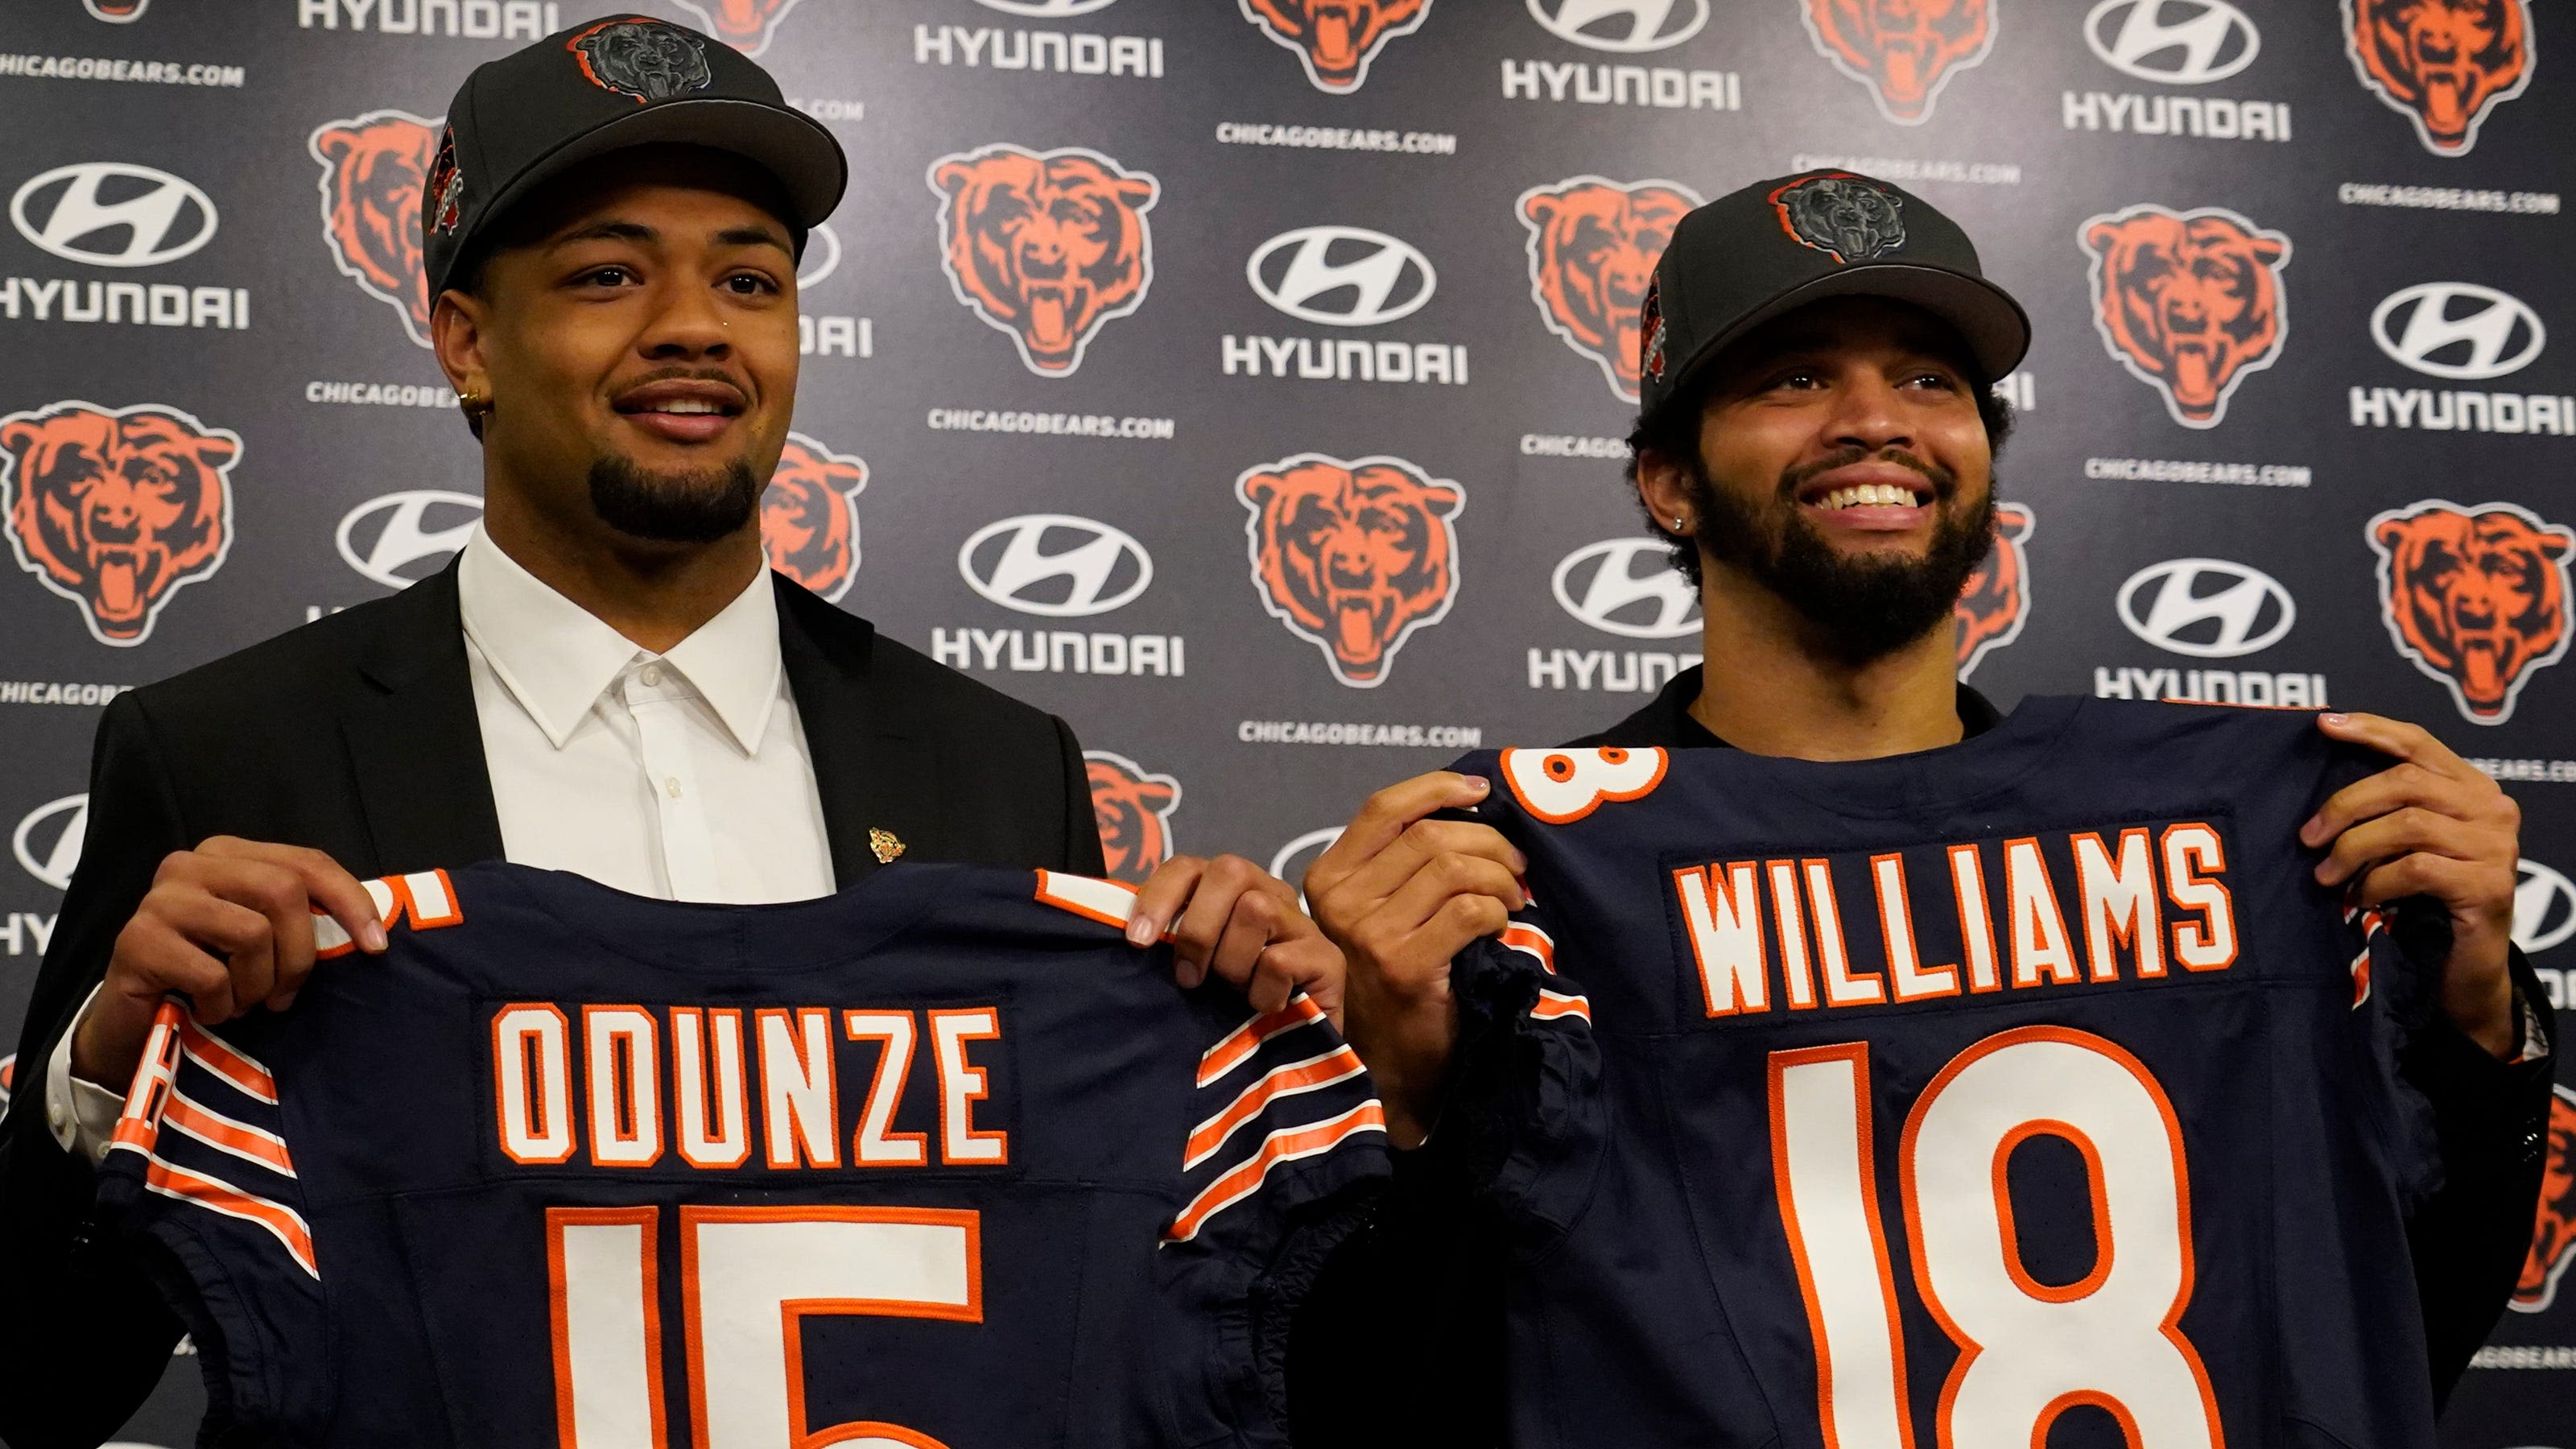 Bears QB Caleb Williams signs richest NFL rookie contract in past 13 years